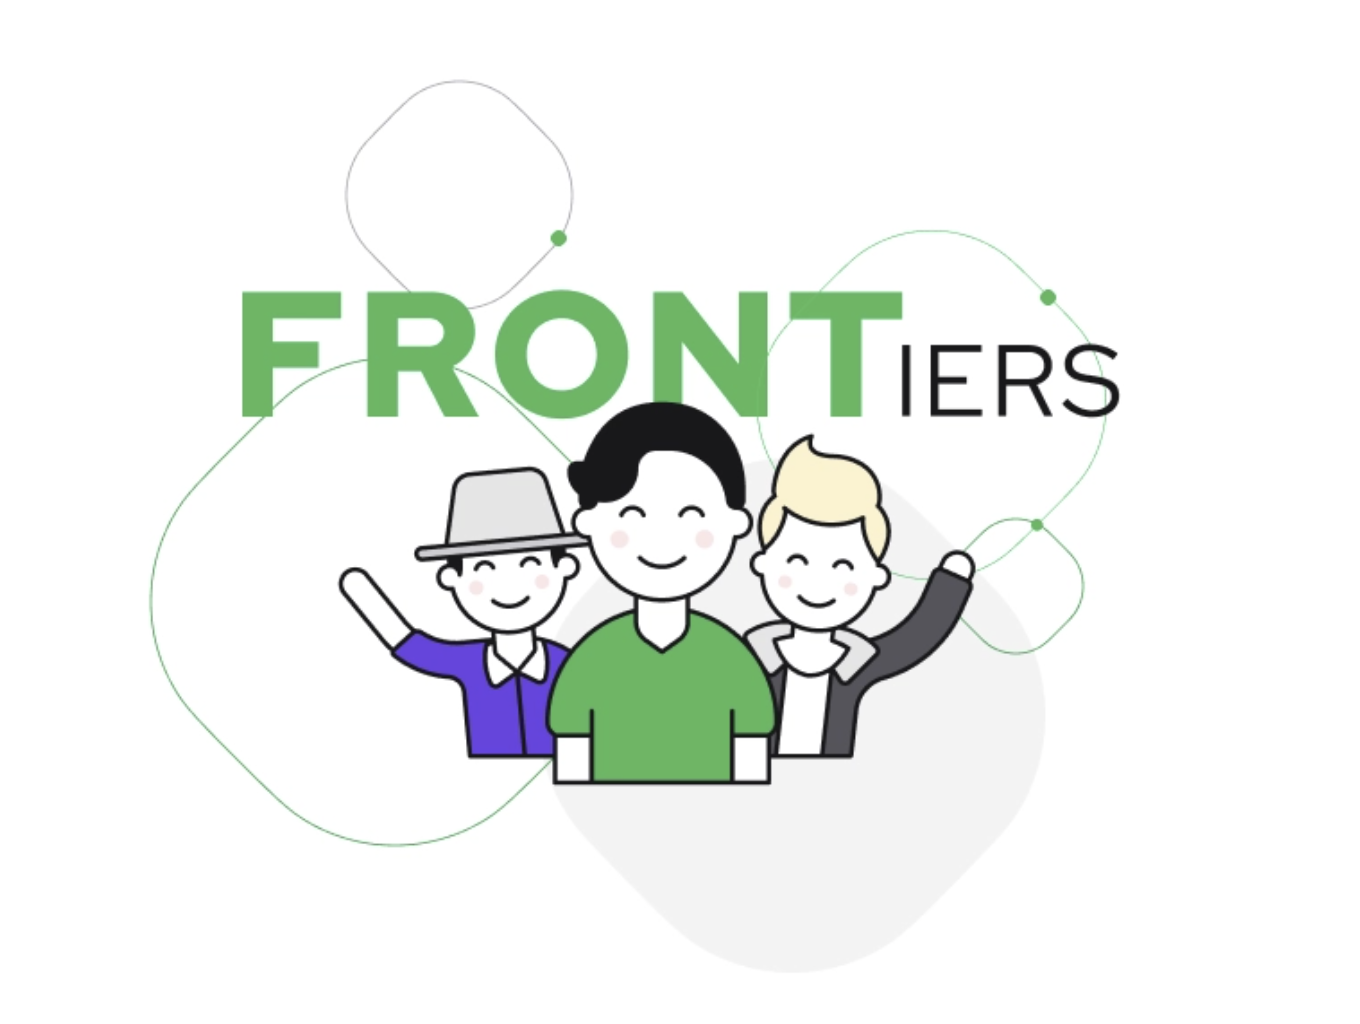 Image of Vue Storefront's "FRONTiers" venture which shows cartoon drawing of different types of people together.